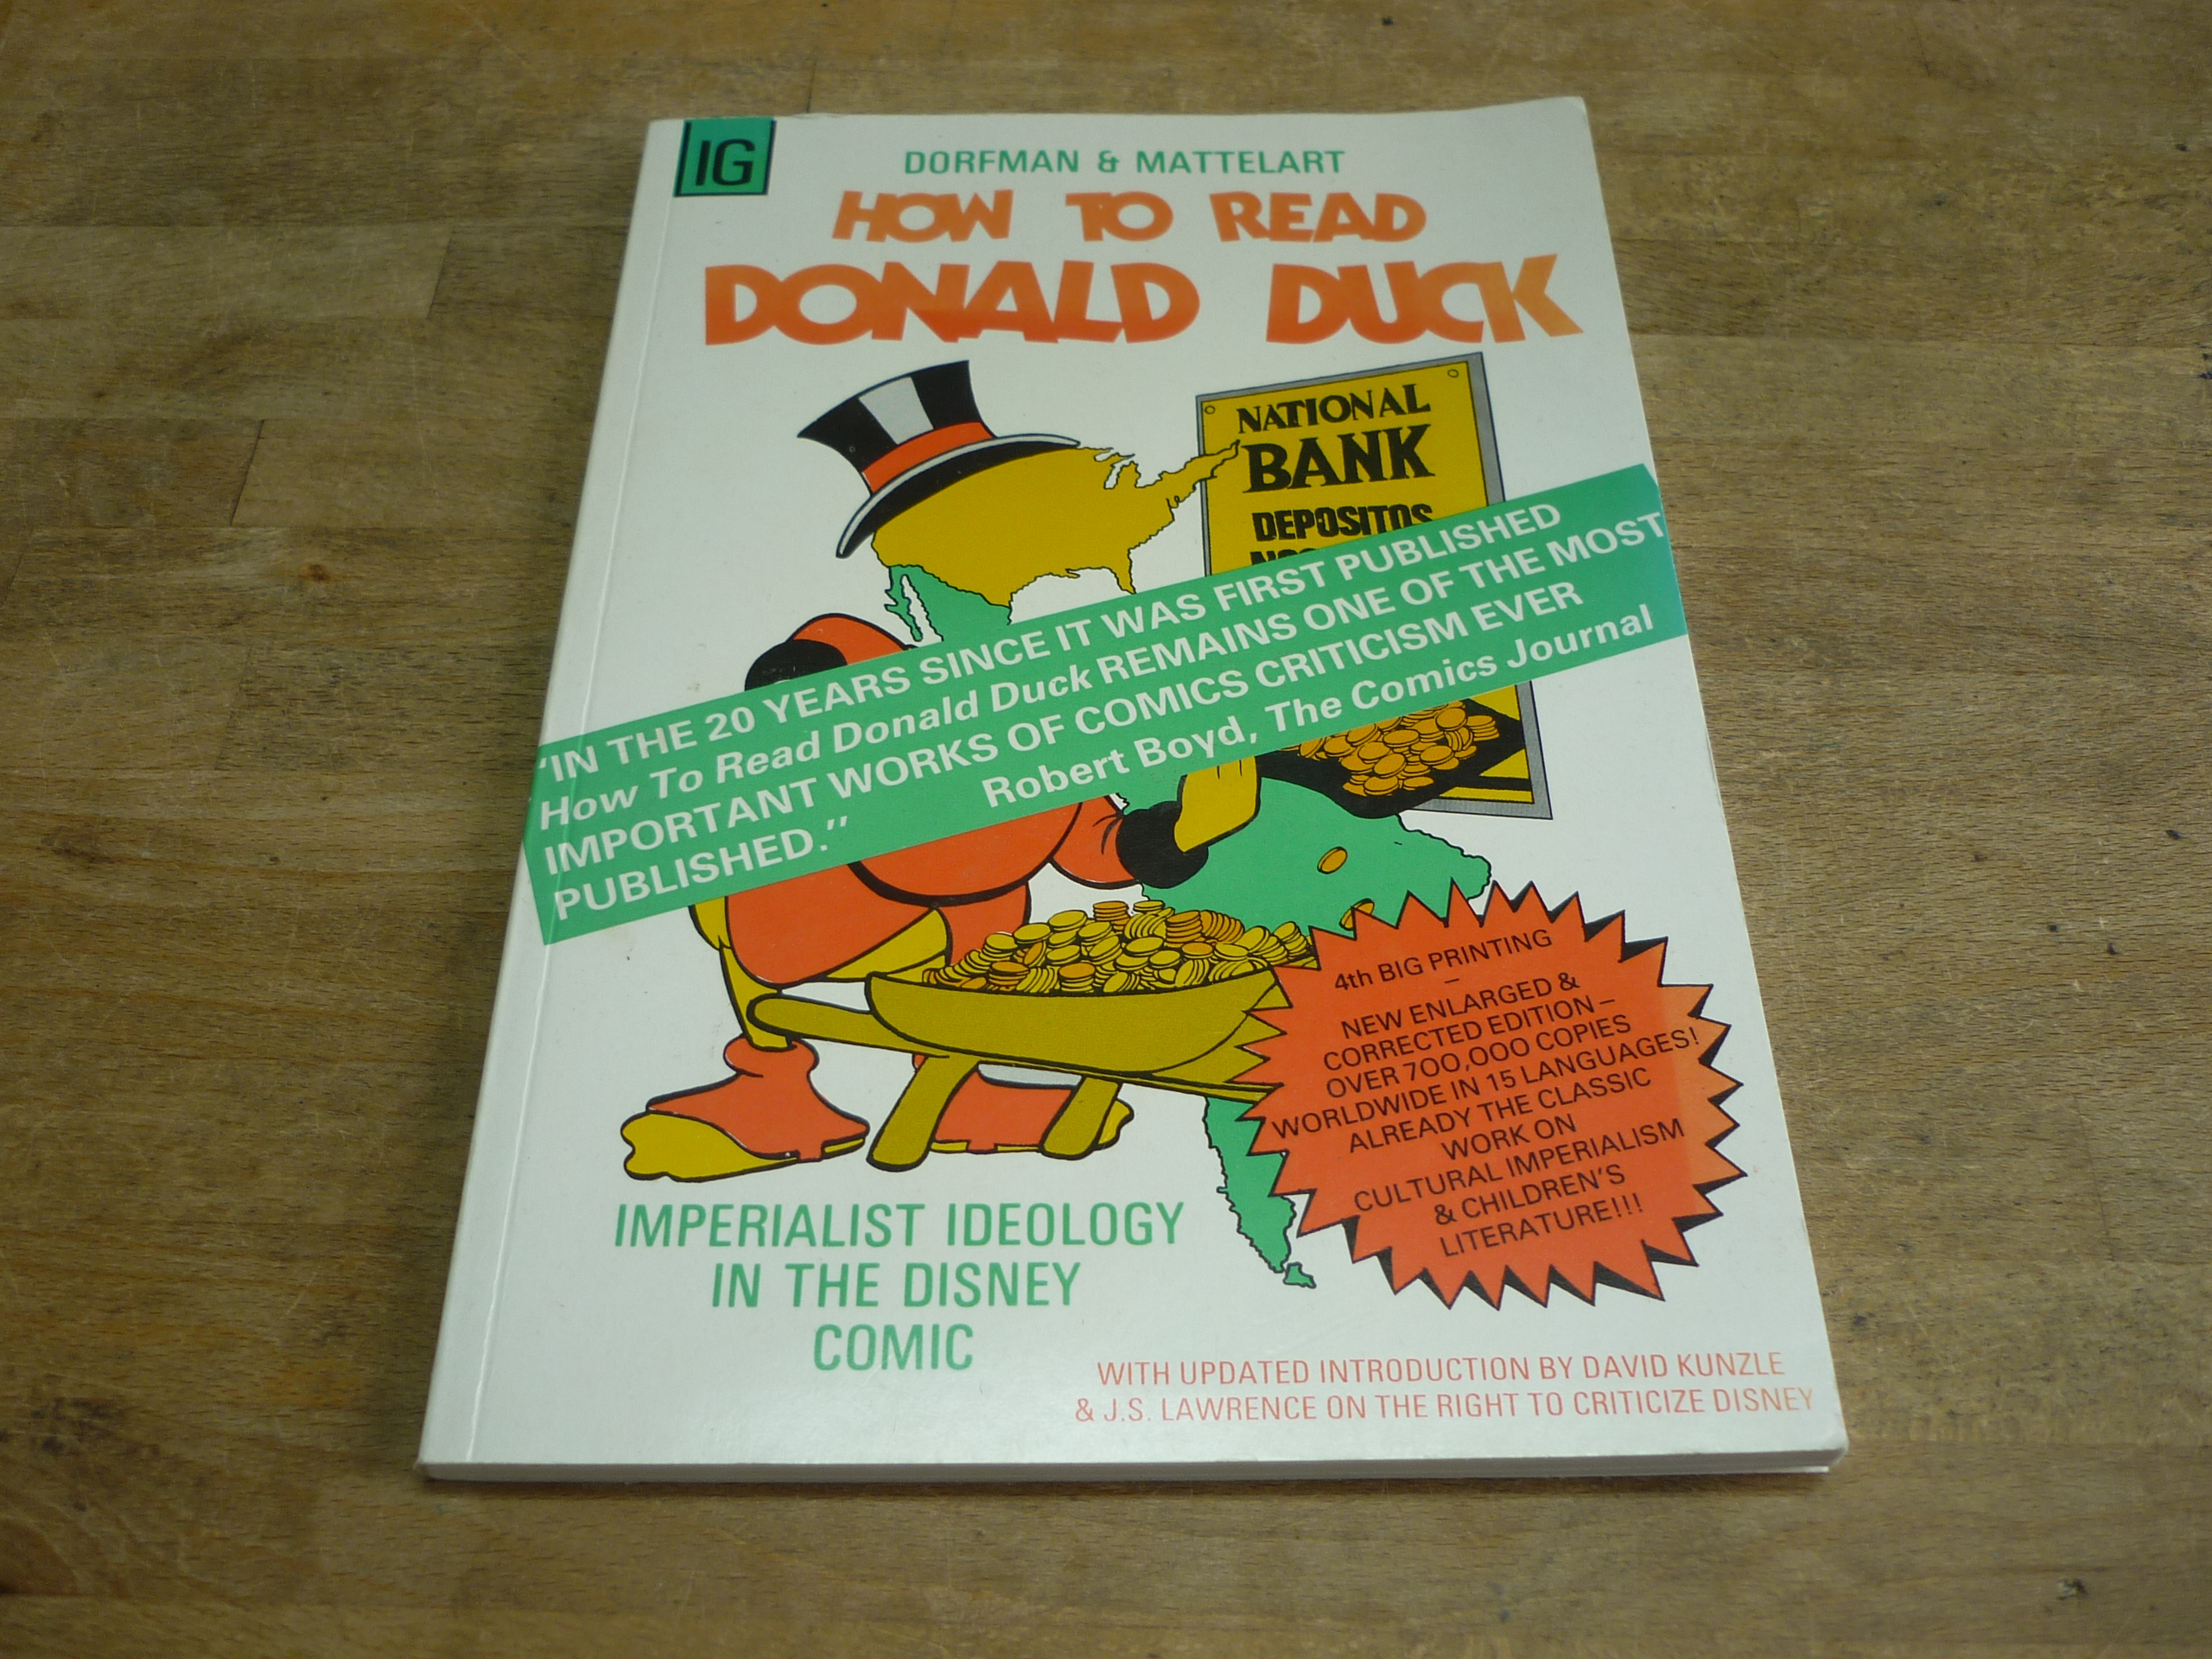 How to Read Donald Duck: Imperialist Ideology in the Disney Comic - Ariel Dorfman & Armand Mattelart (translated by David Kunzle)